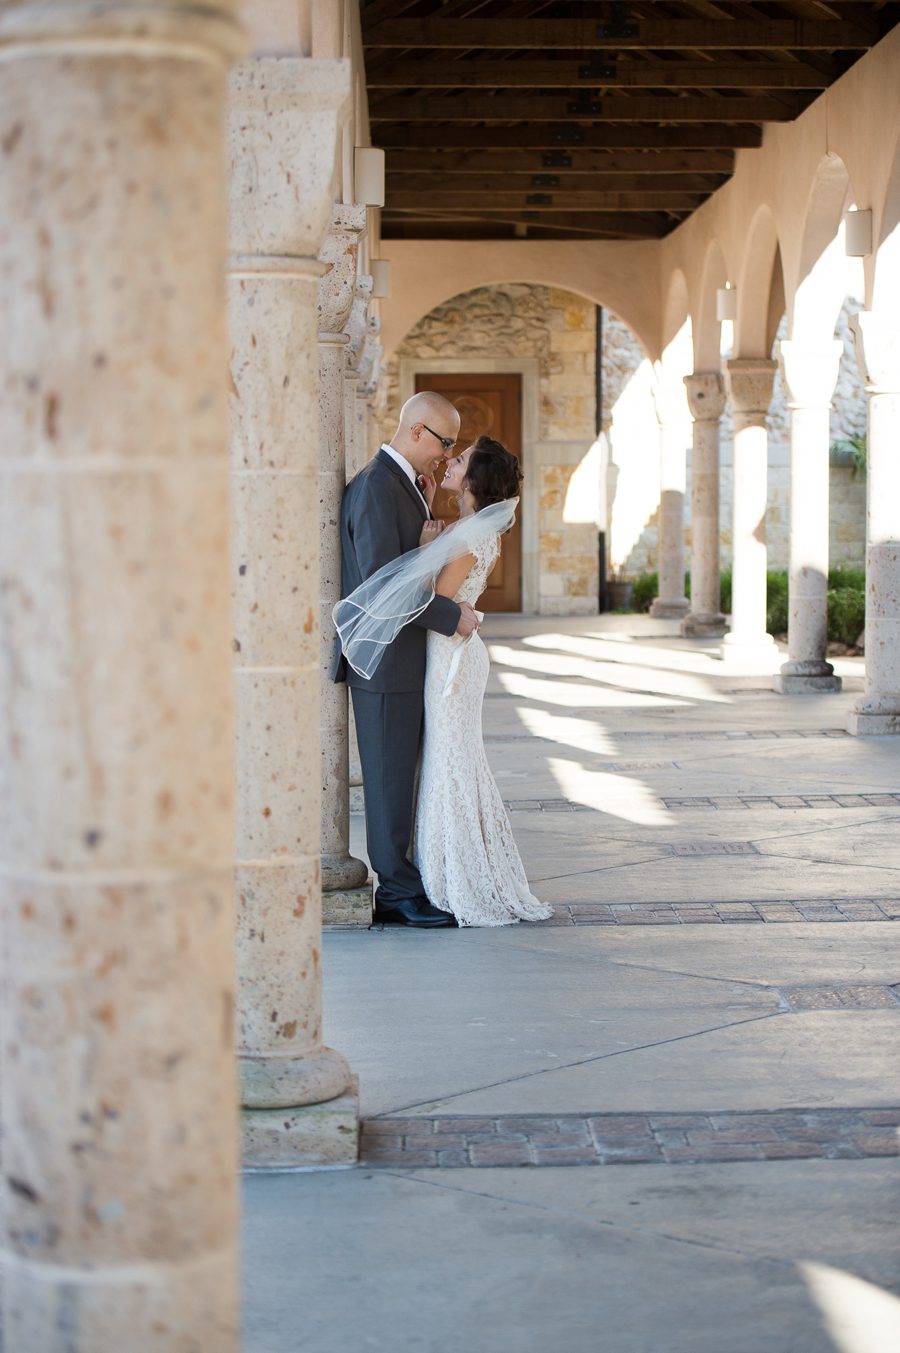 A candid moment shared between a bride and her groom captured by Houston wedding photographer, Anne Schmidt.